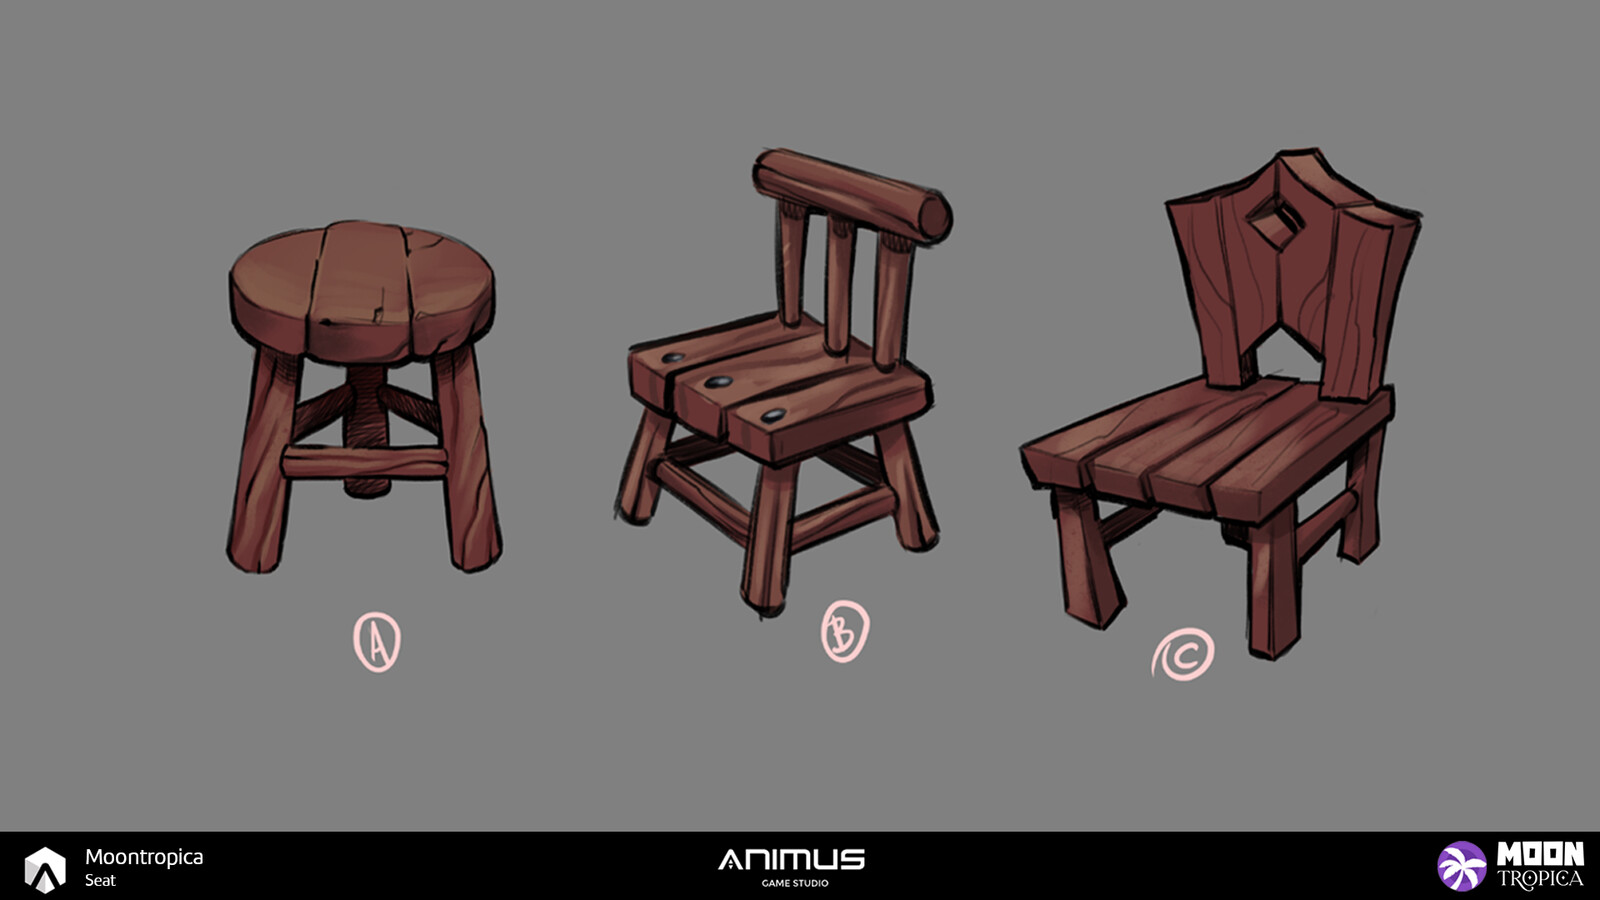 Bench and chairs Concept Art